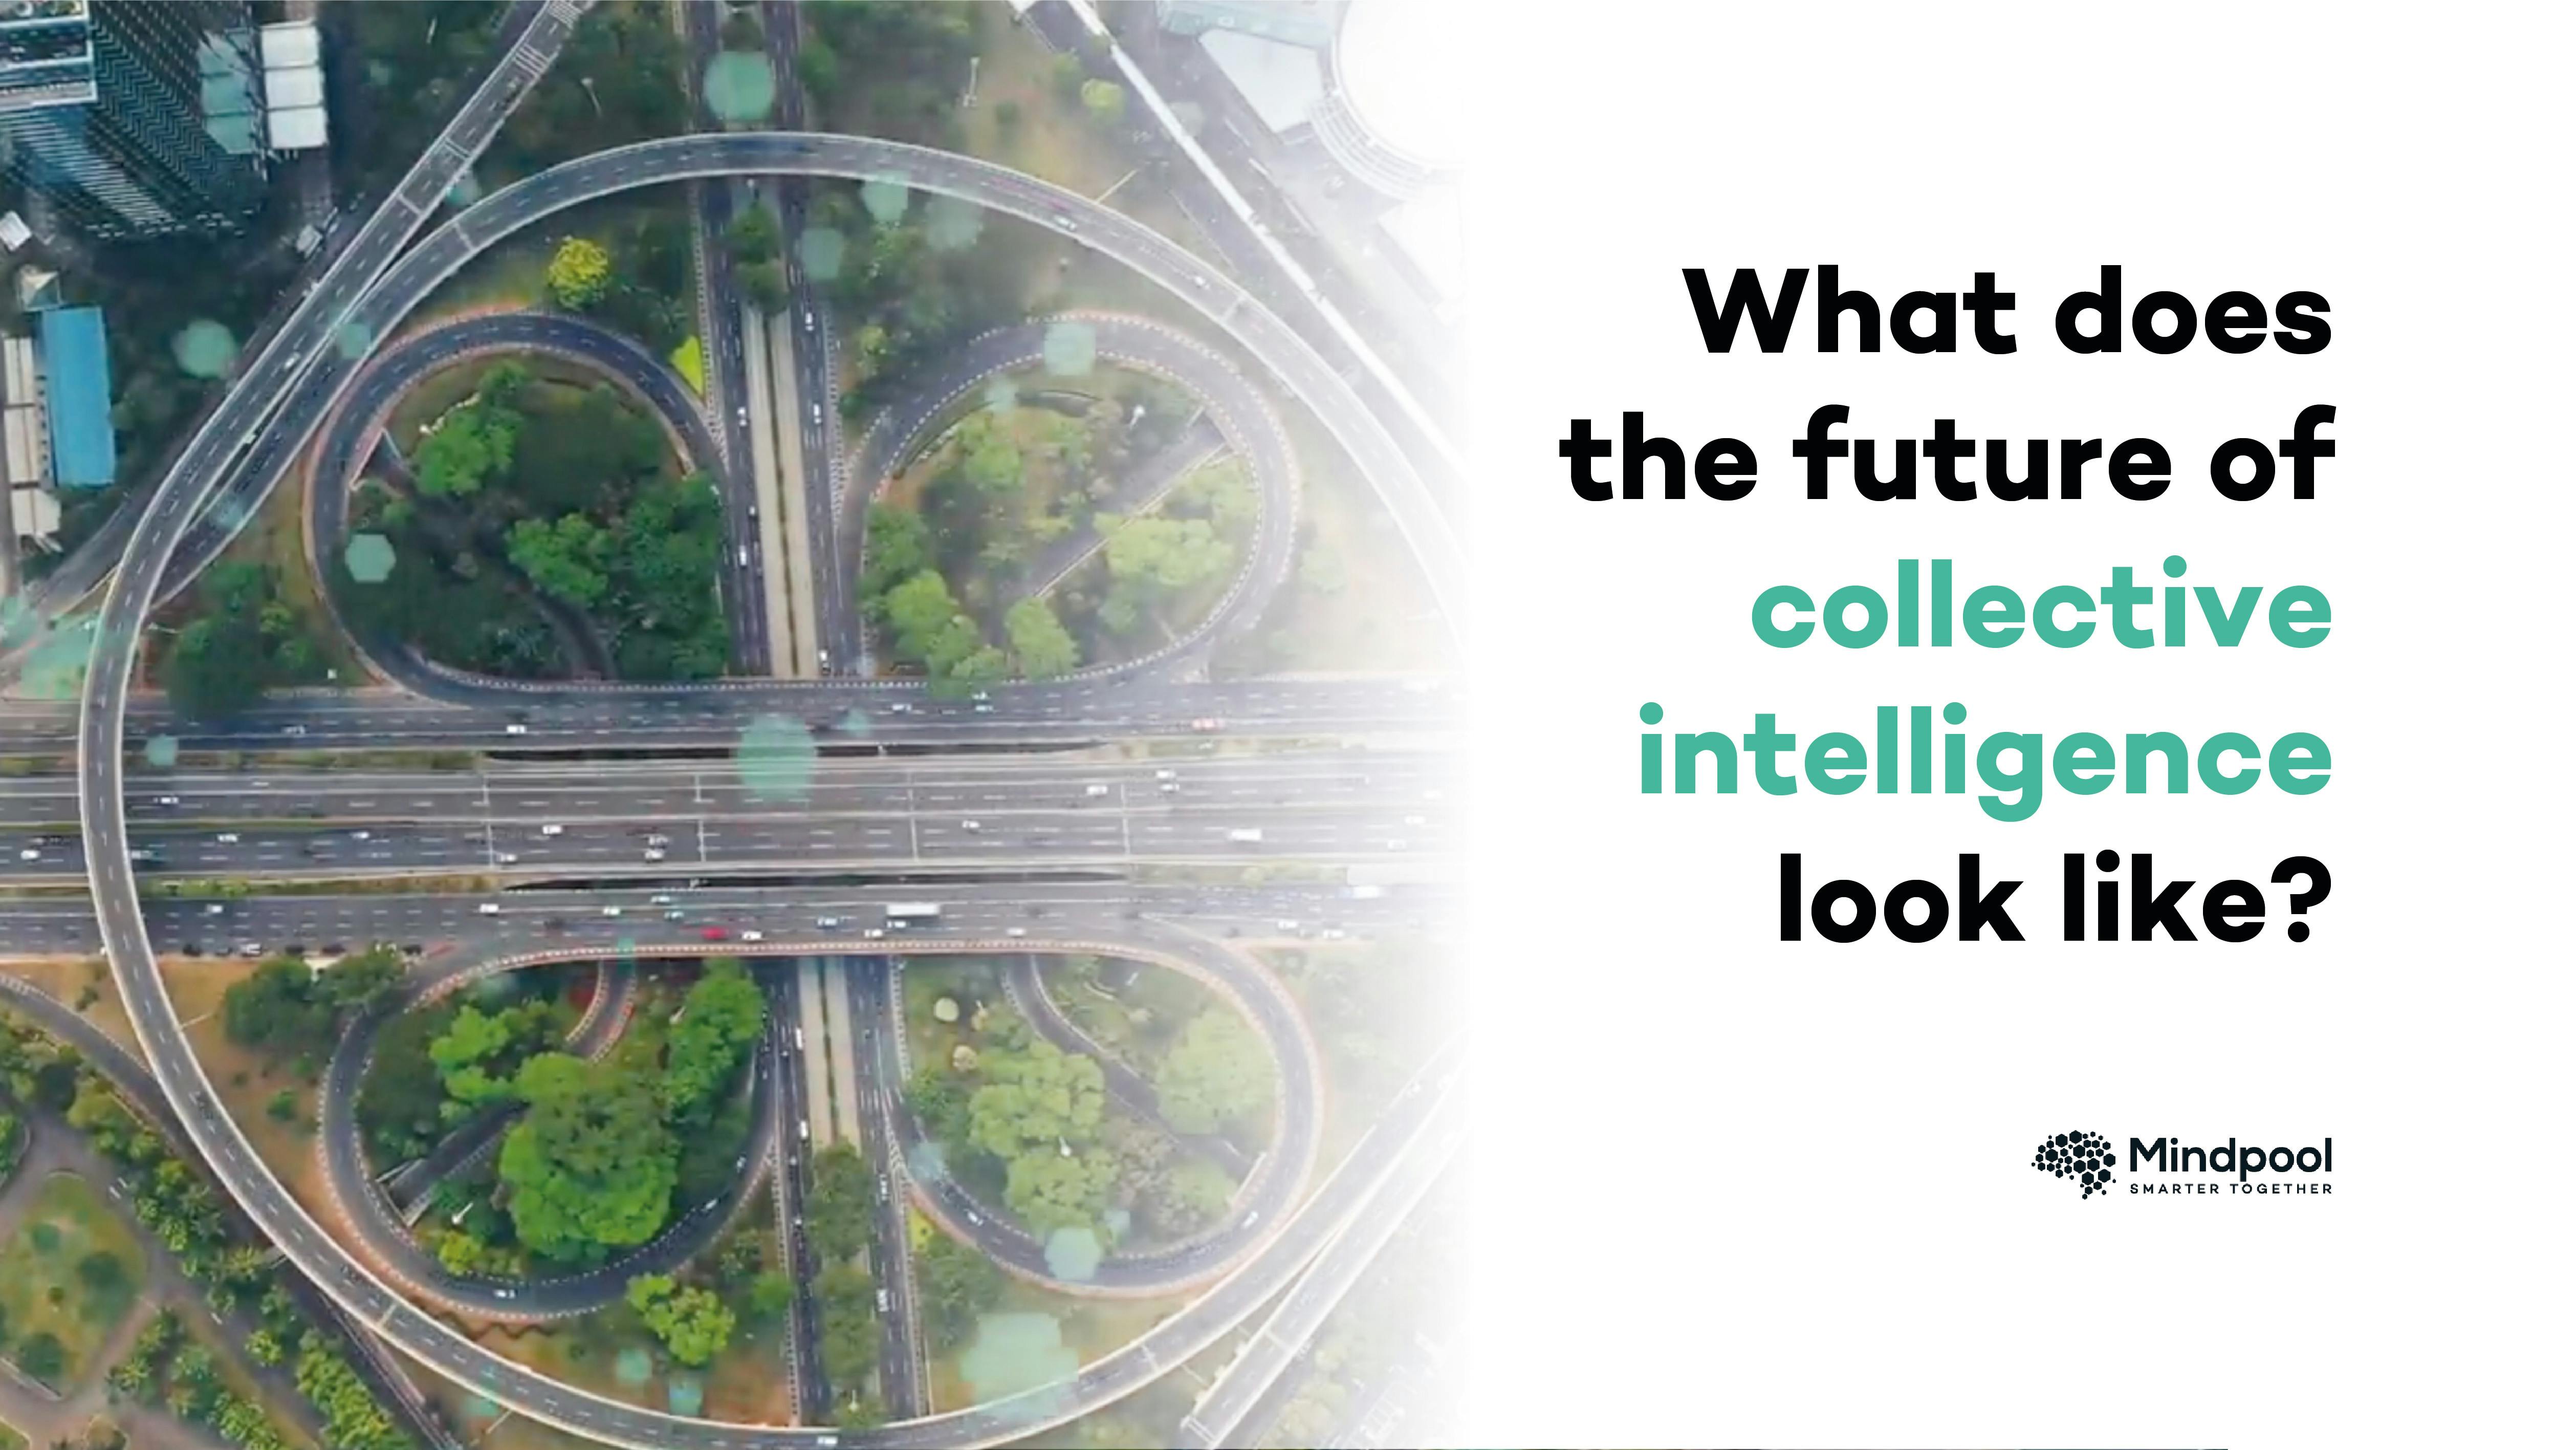 What does the future of collective intelligence look like?